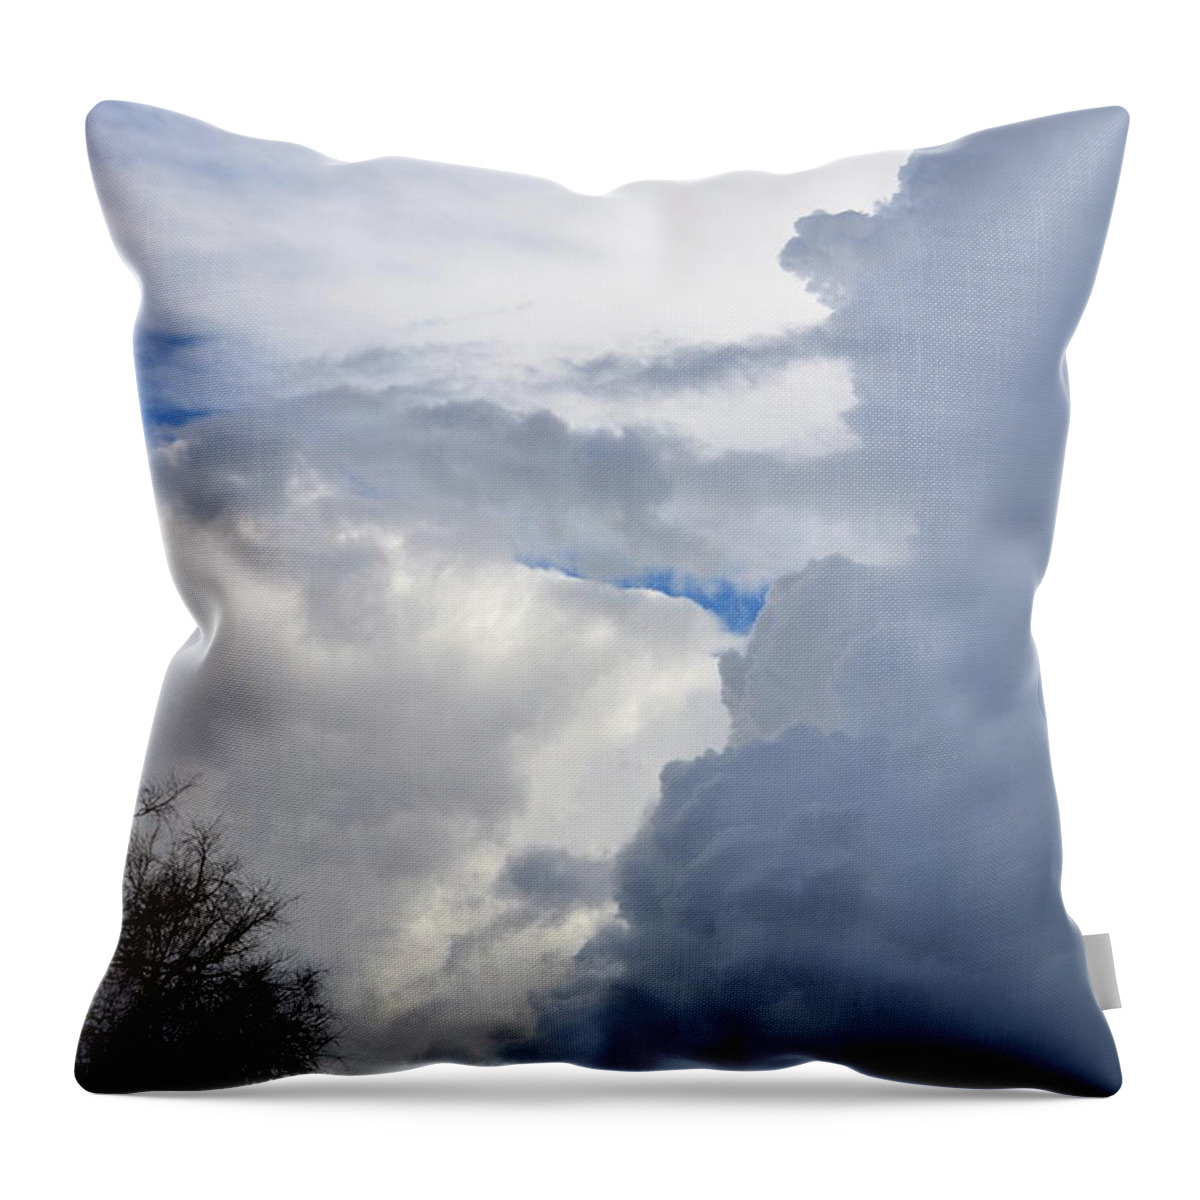  Throw Pillow featuring the photograph Here Comes the Rain in Napa by Dean Ferreira